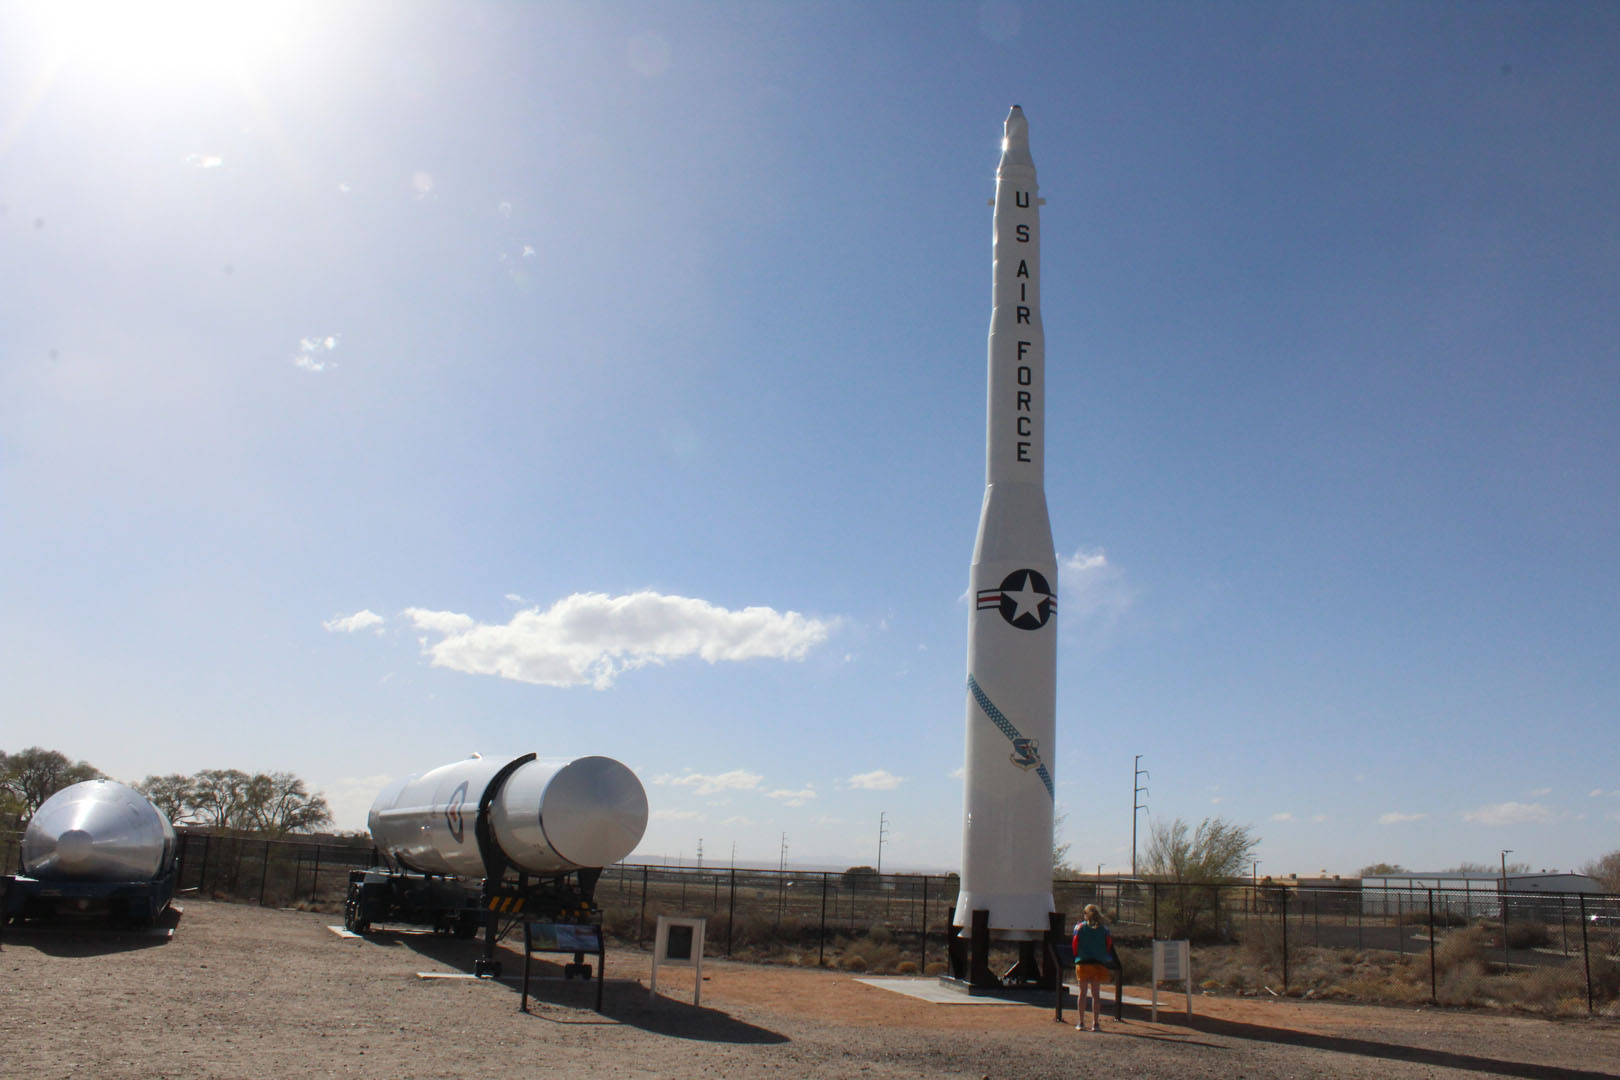 Beatrice Rousell '24 stands in front of a retired rocket at Albuquerque's National Nuclear History Museum in March 2023. Photo submitted by Zeke Lloyd ’24.